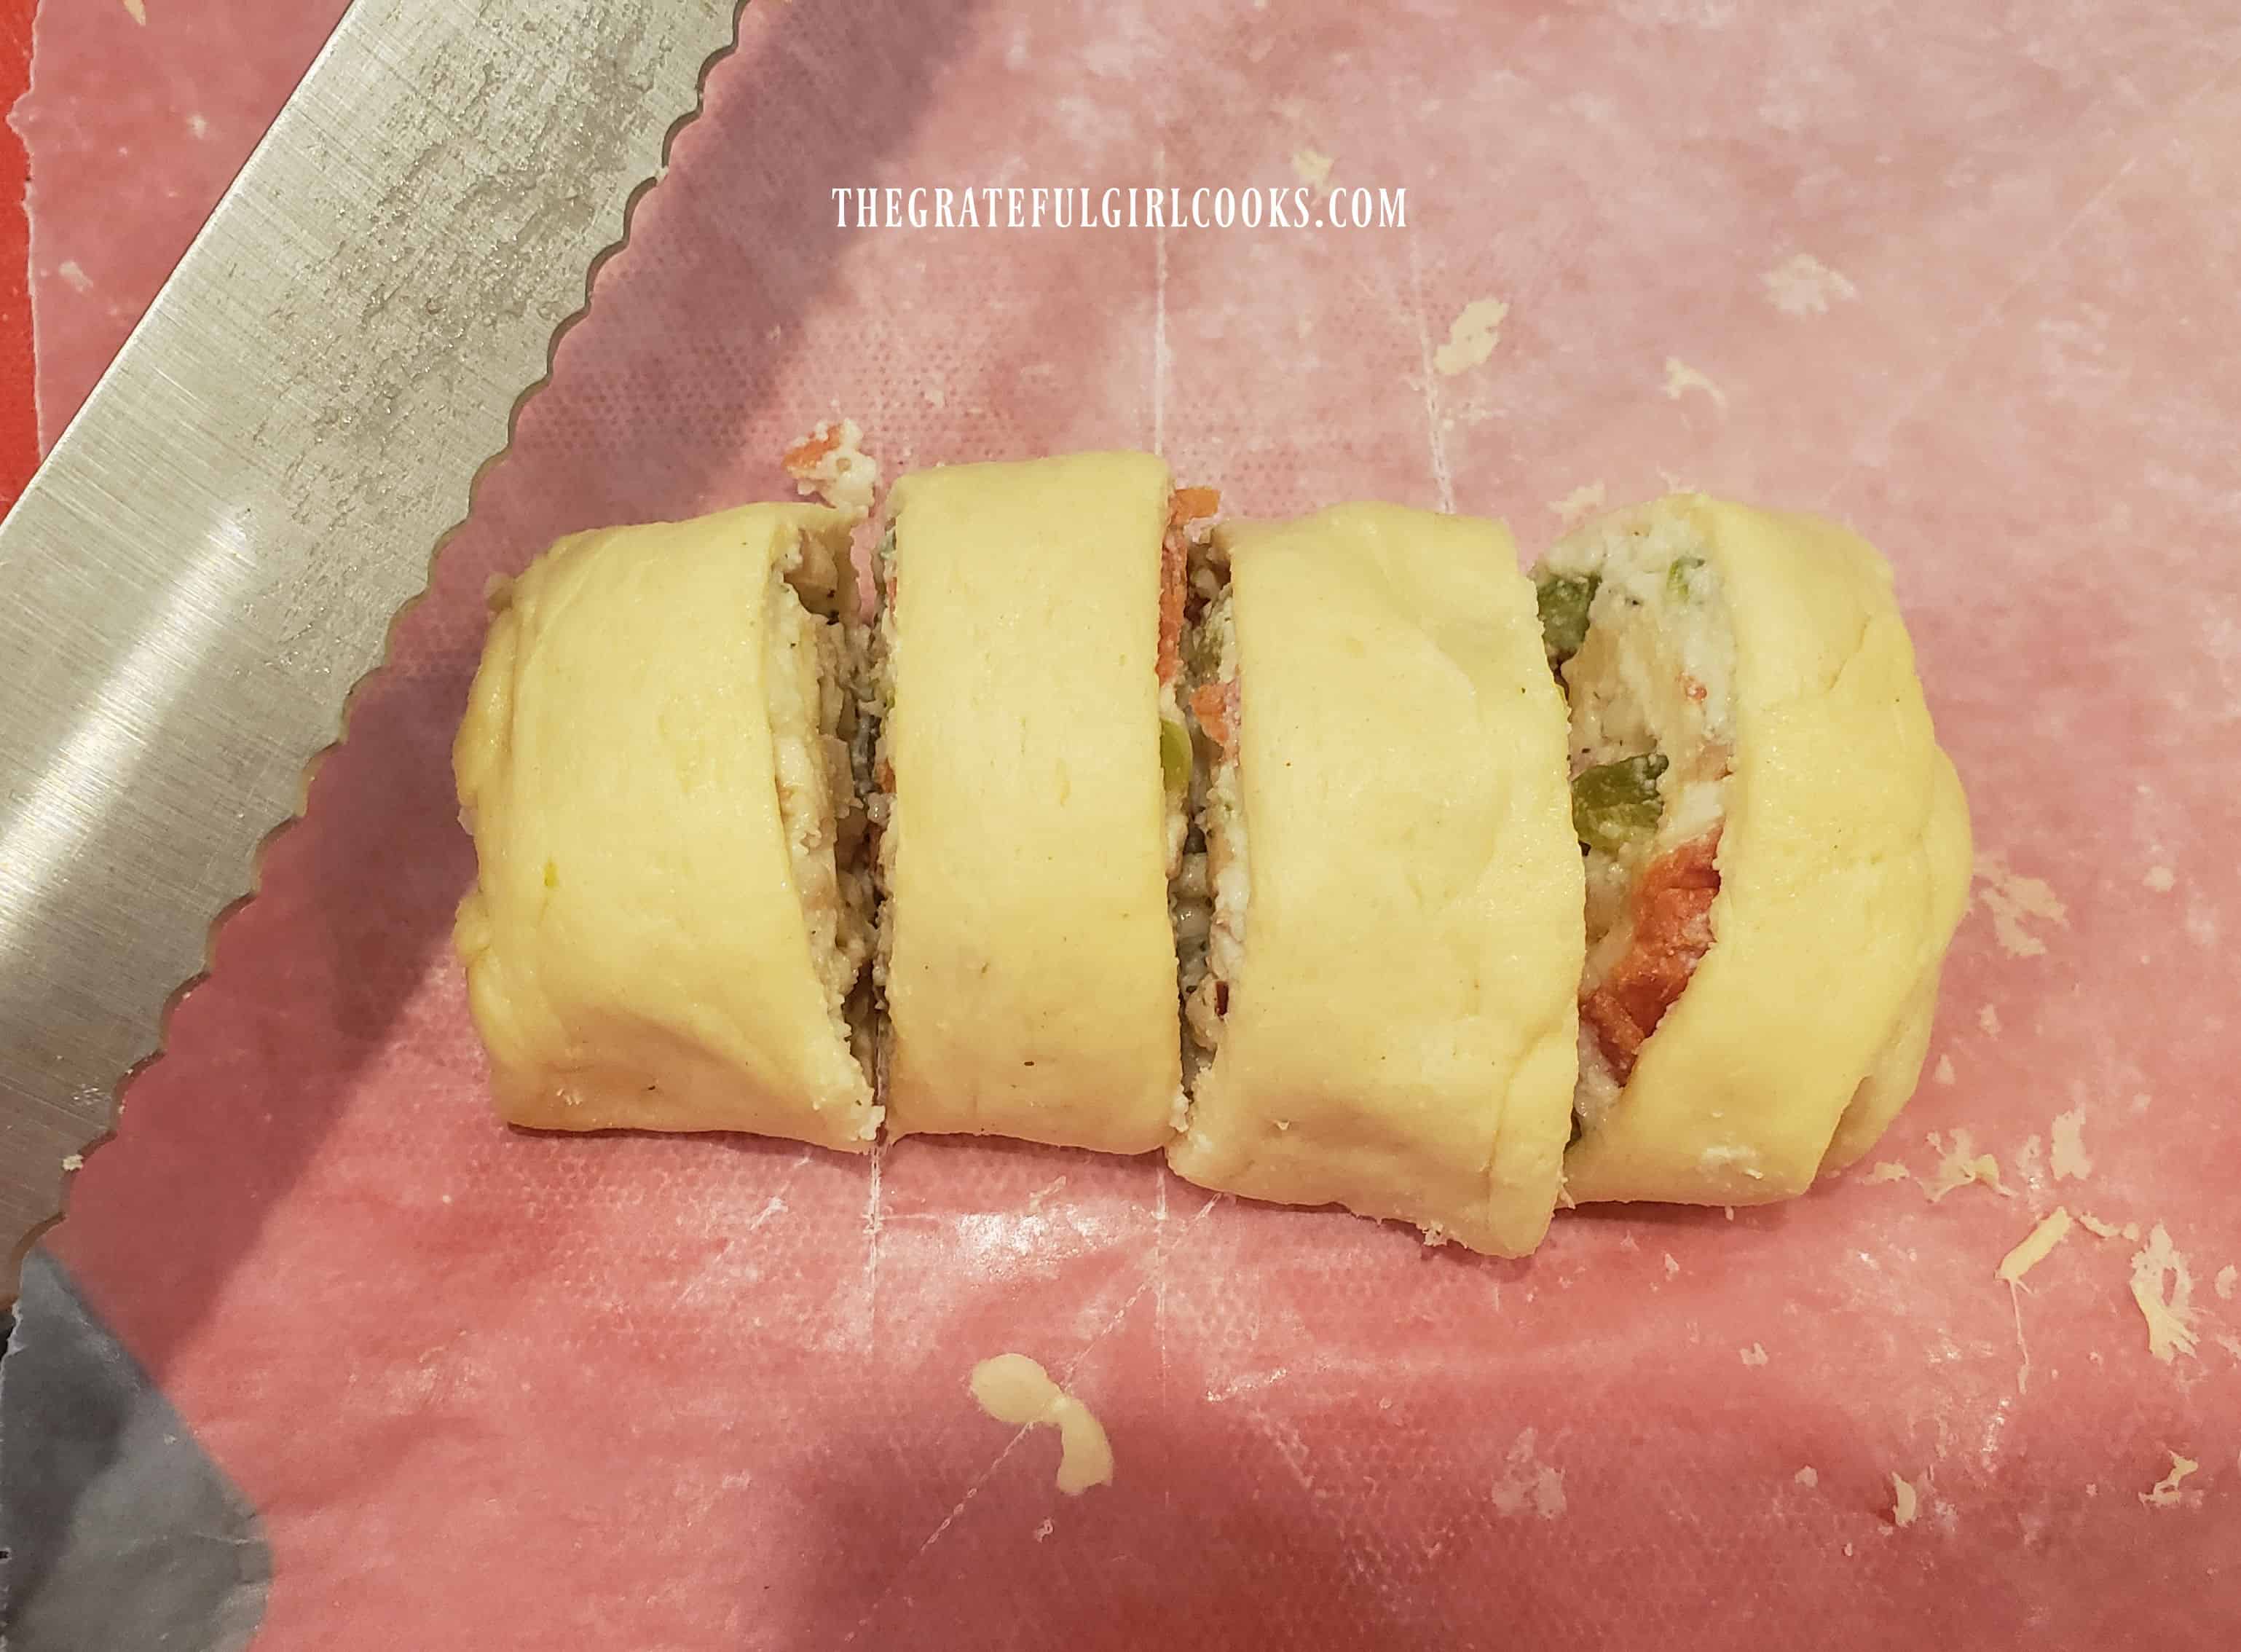 Each of the calzone rolls are cut into four slices with a serrated knife.